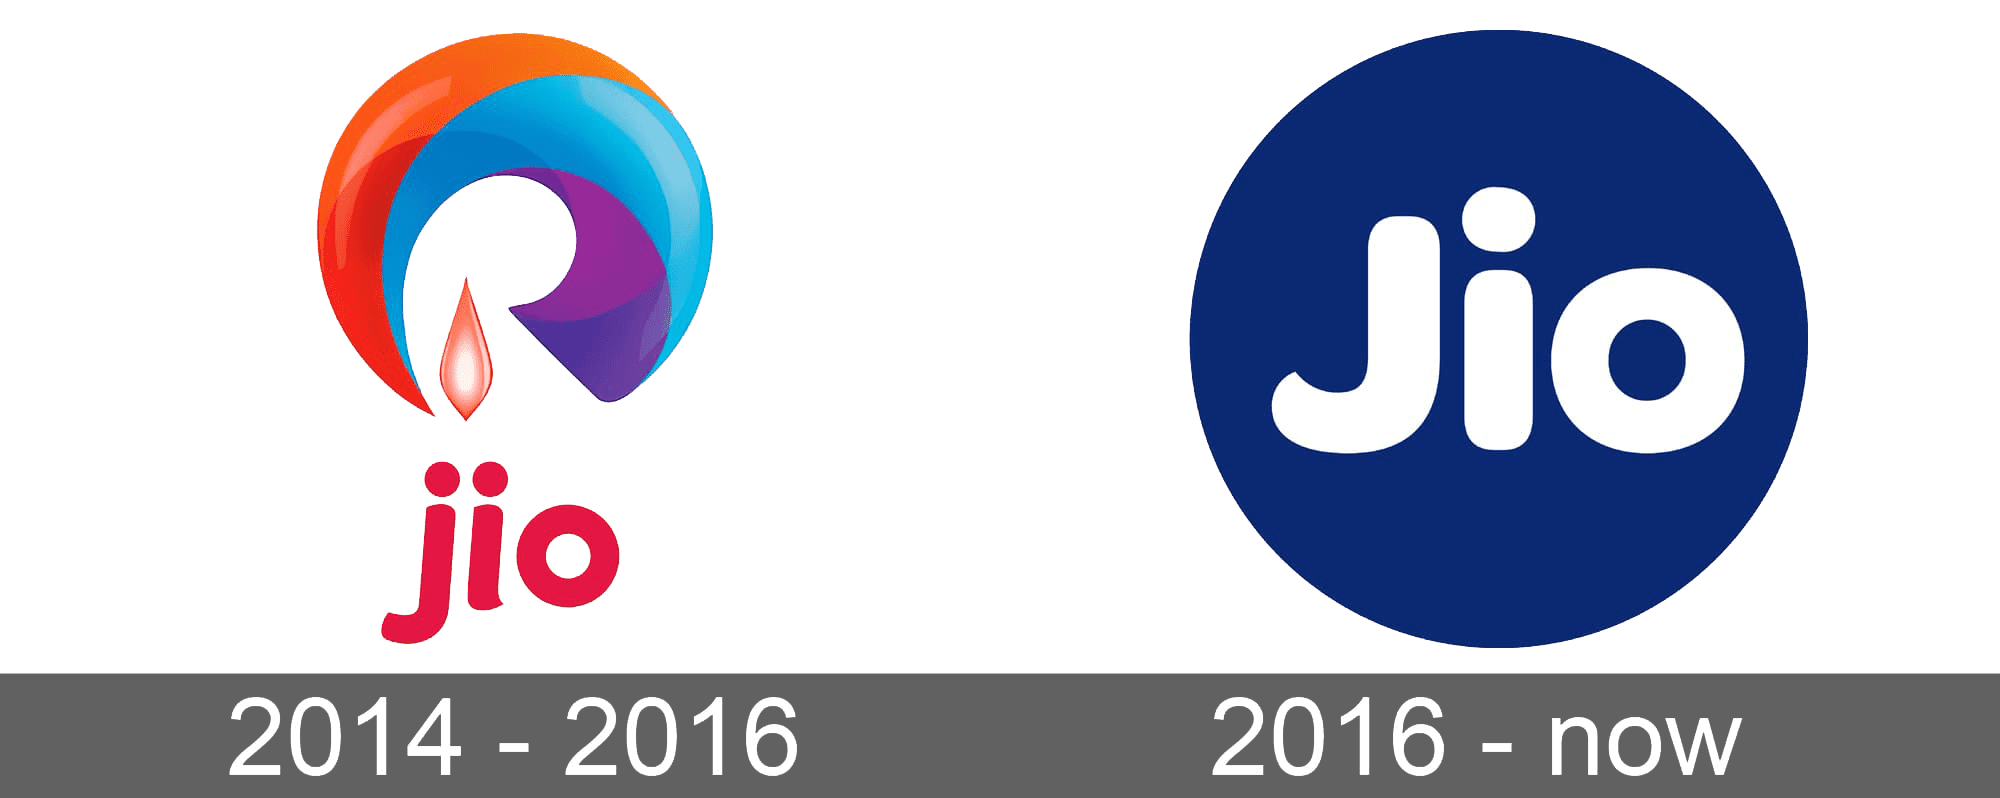 Reliance Jio-owned spectrum footprint increases by 55% to 1,717 MHz